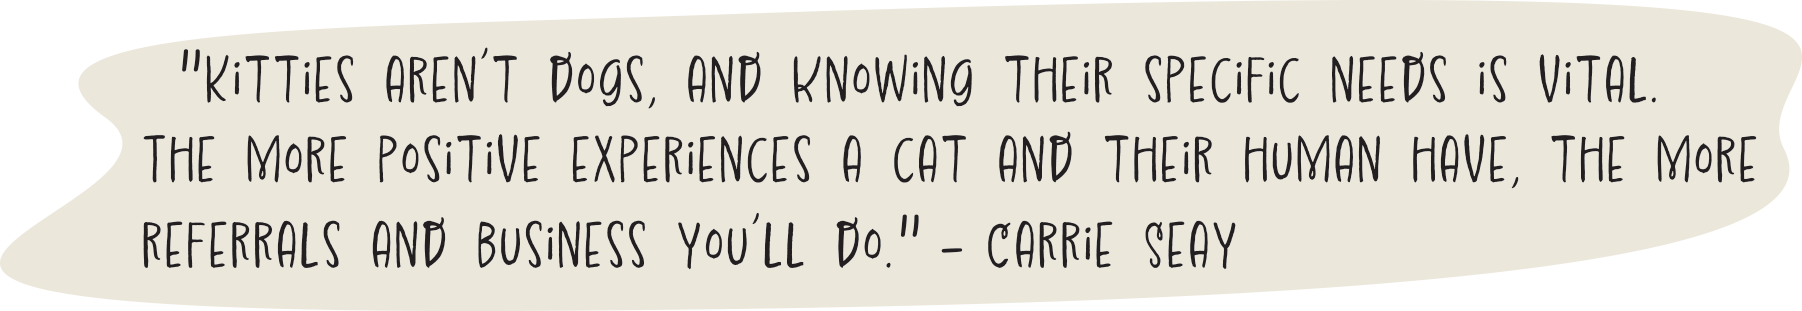 "Kitties aren’t dogs, and knowing their specific needs is vital. The more positive experiences a cat and their human have, the more referrals and business you’ll do." - Carrie Seay